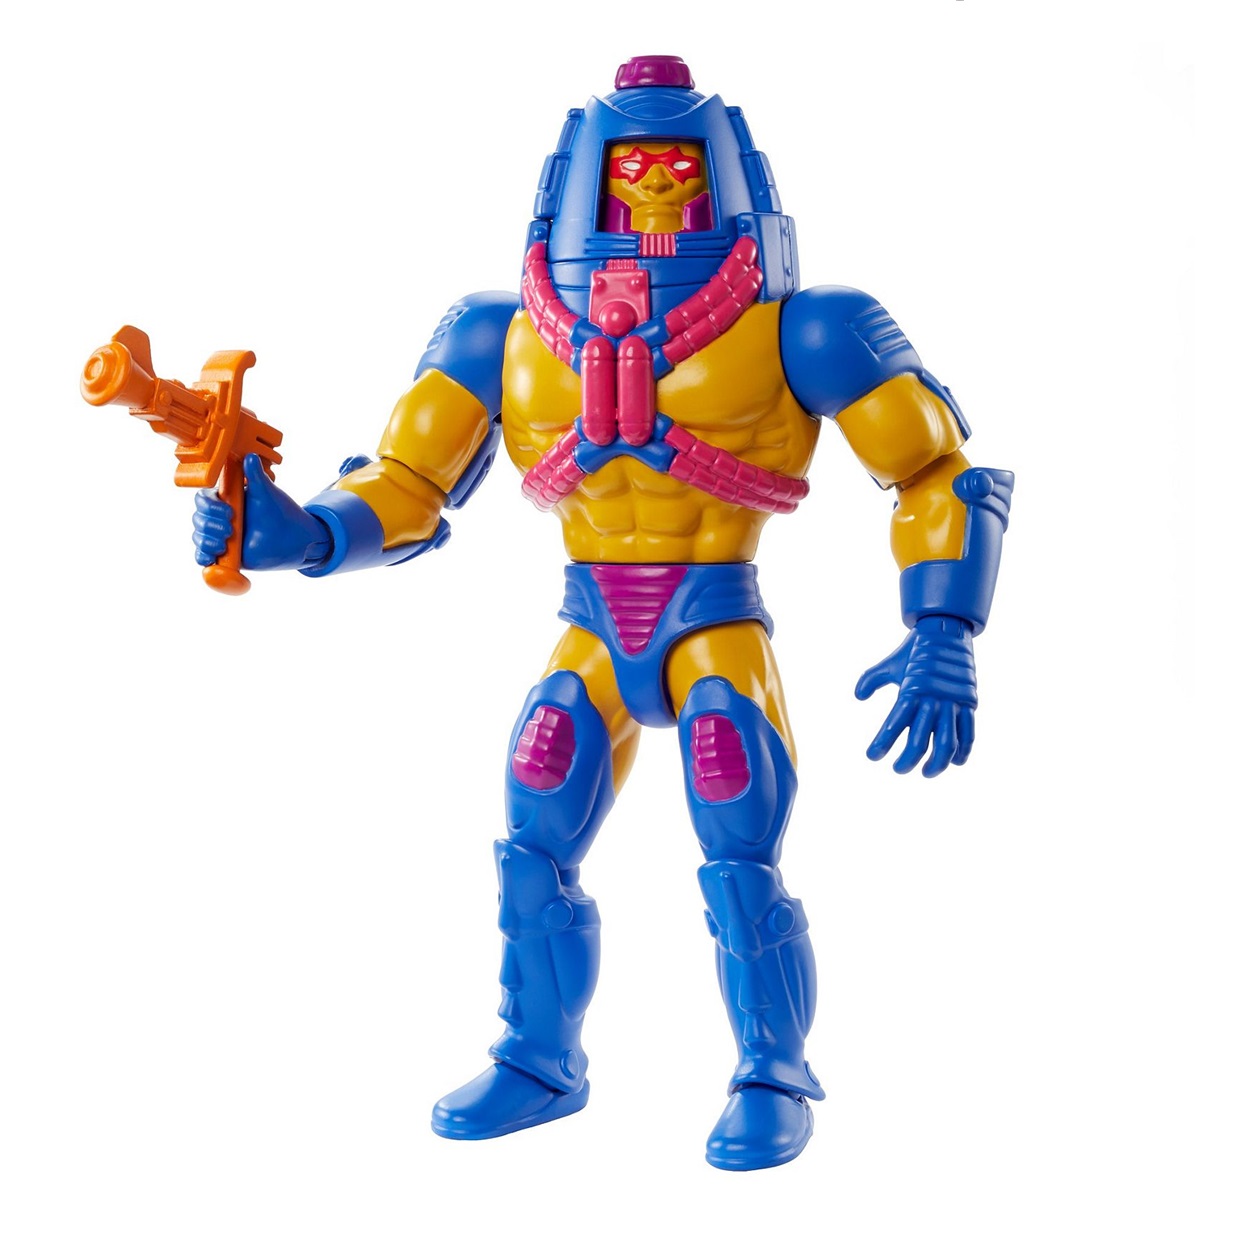  Man E Faces Reto Play Masters Of The Universe New For 20 